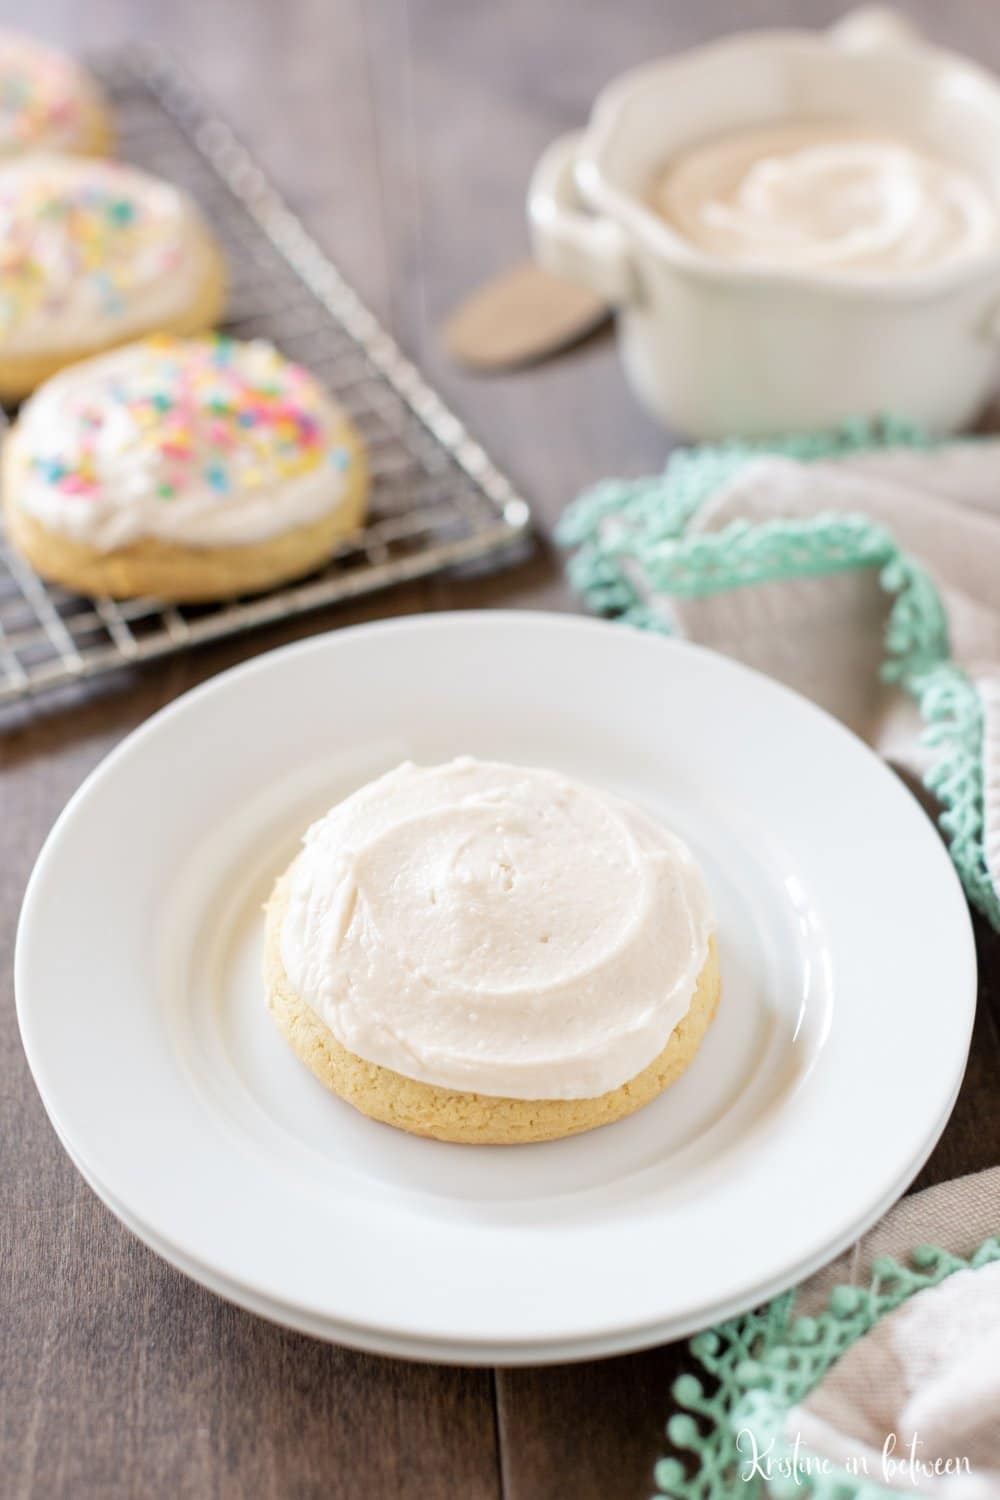 This soft sugar cookie recipe is a must-bake for the holidays! The cookies are light and fluffy, making them perfect for buttercream frosting and sprinkles!